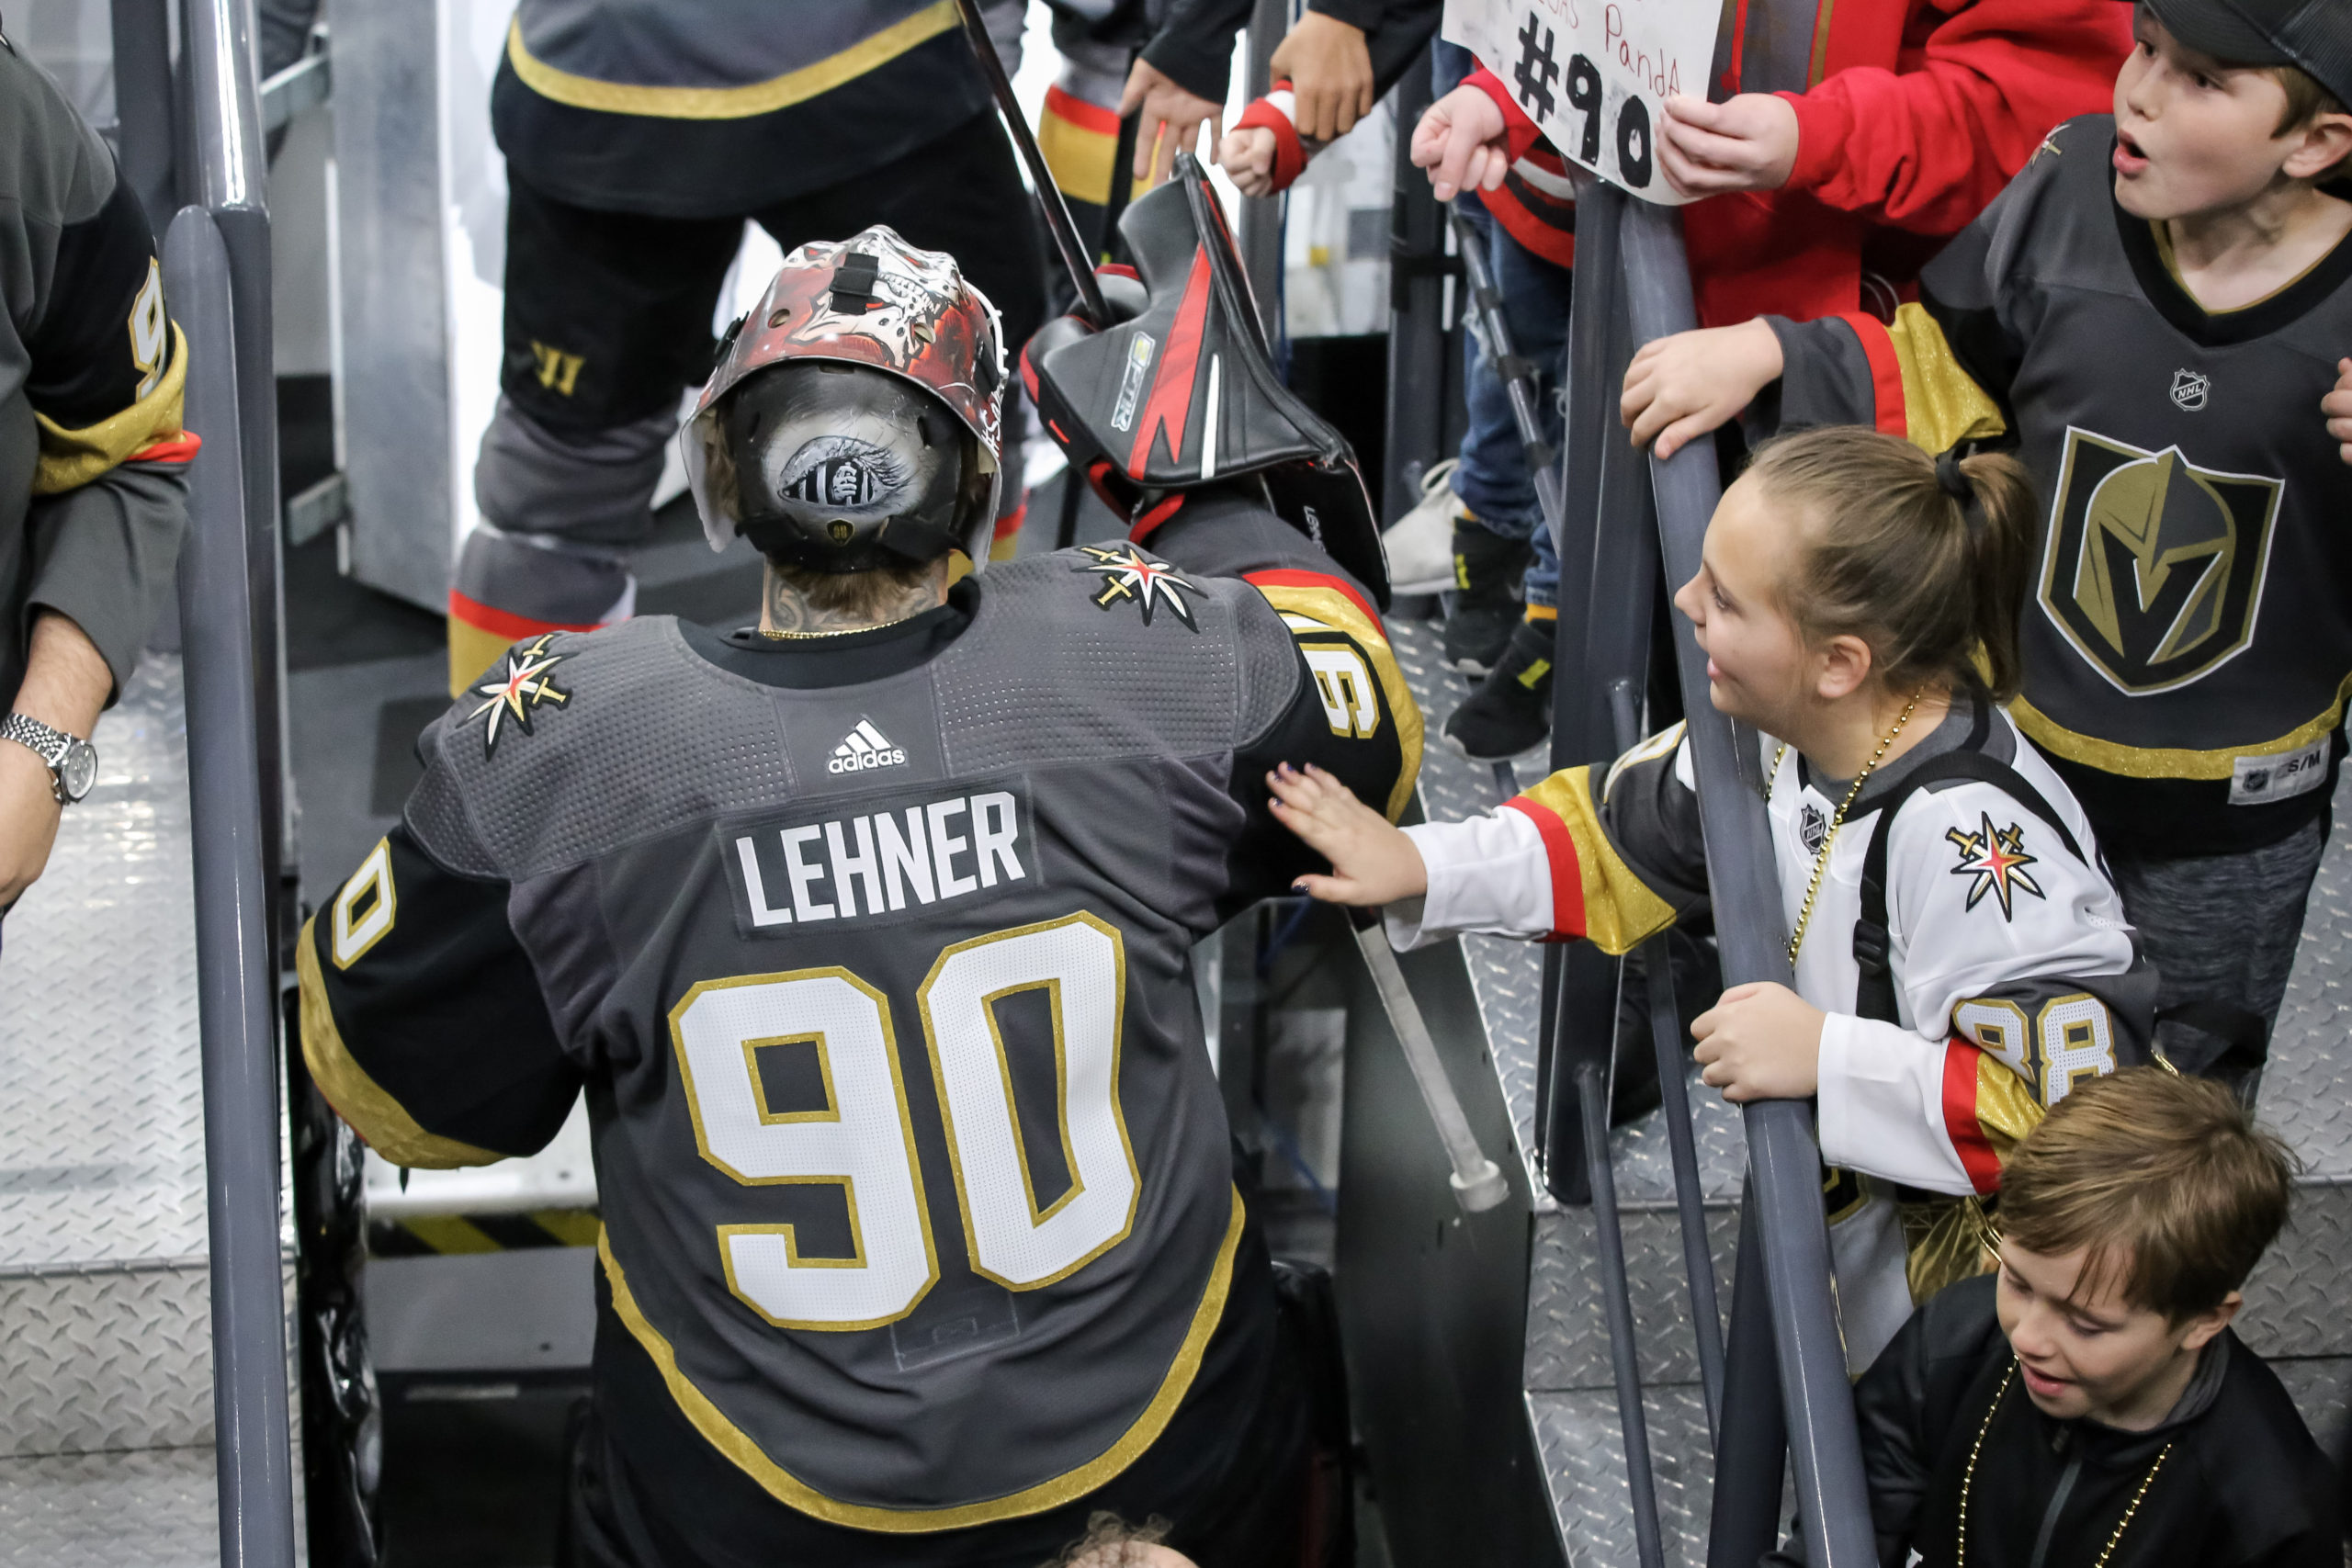 Lehner returns to practice as the Golden Knights open up final